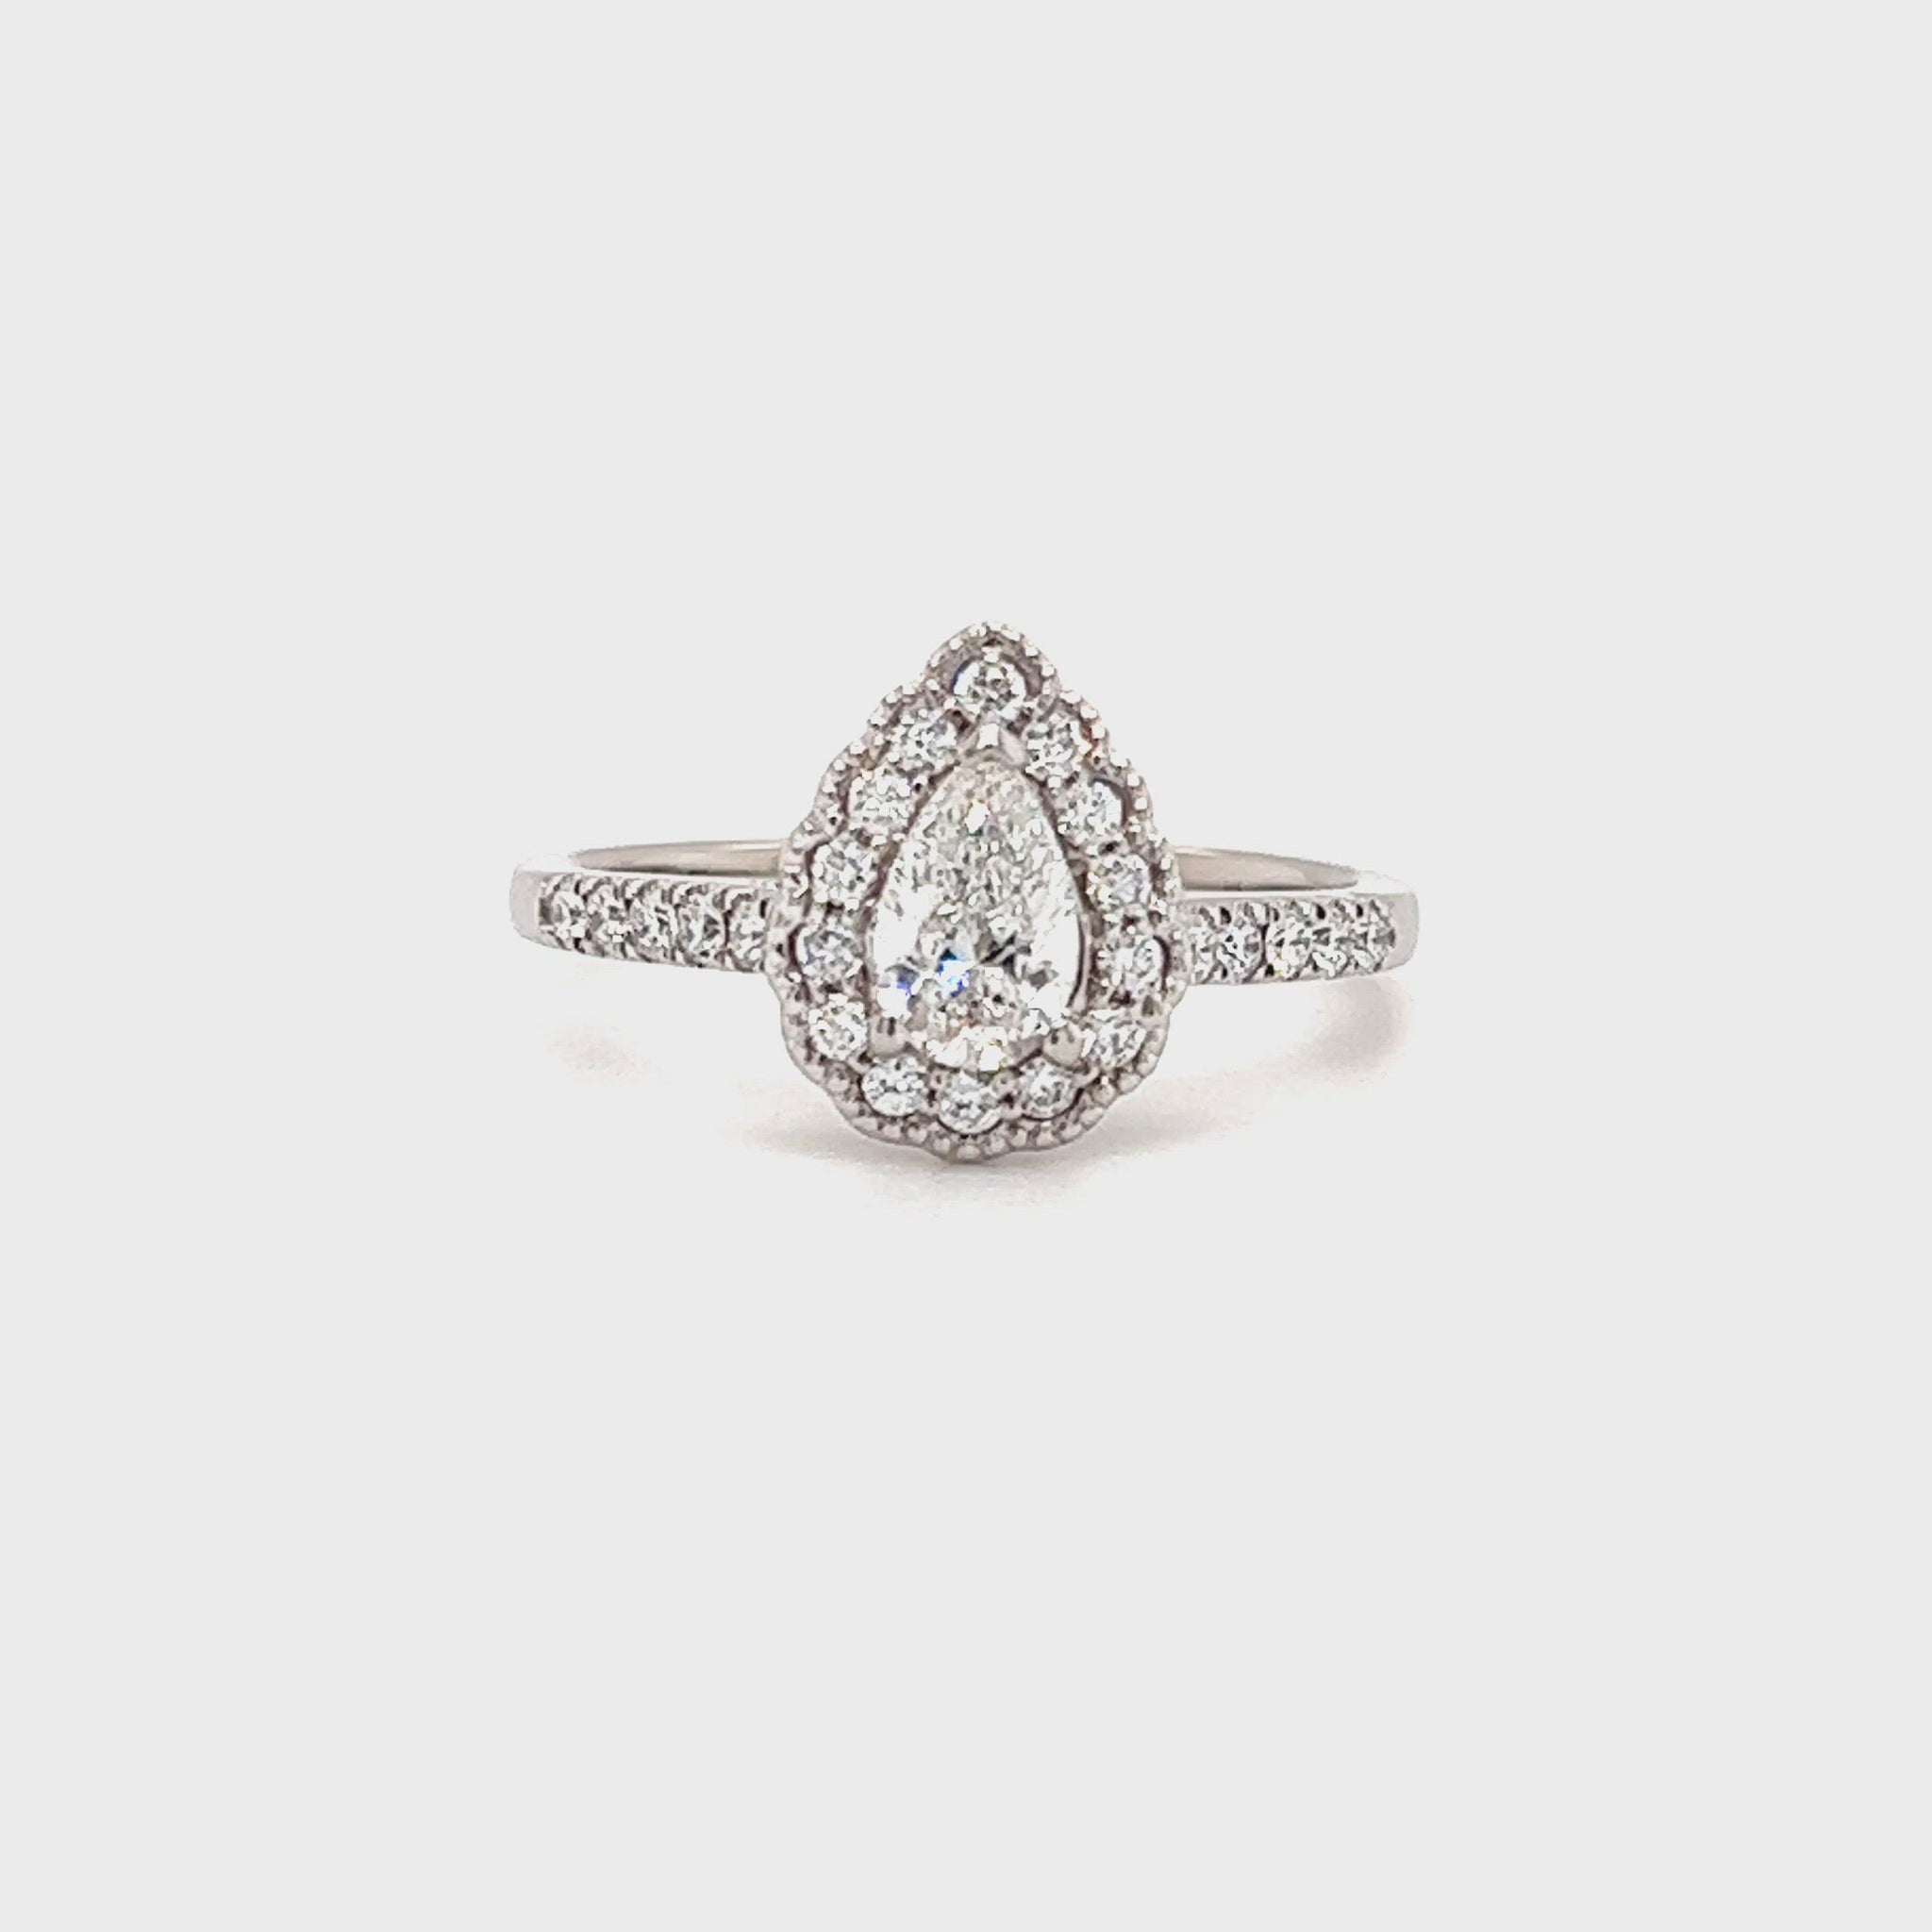 Pear Diamond Ring with Diamond Halo and Side Diamonds in 14K White Gold Video